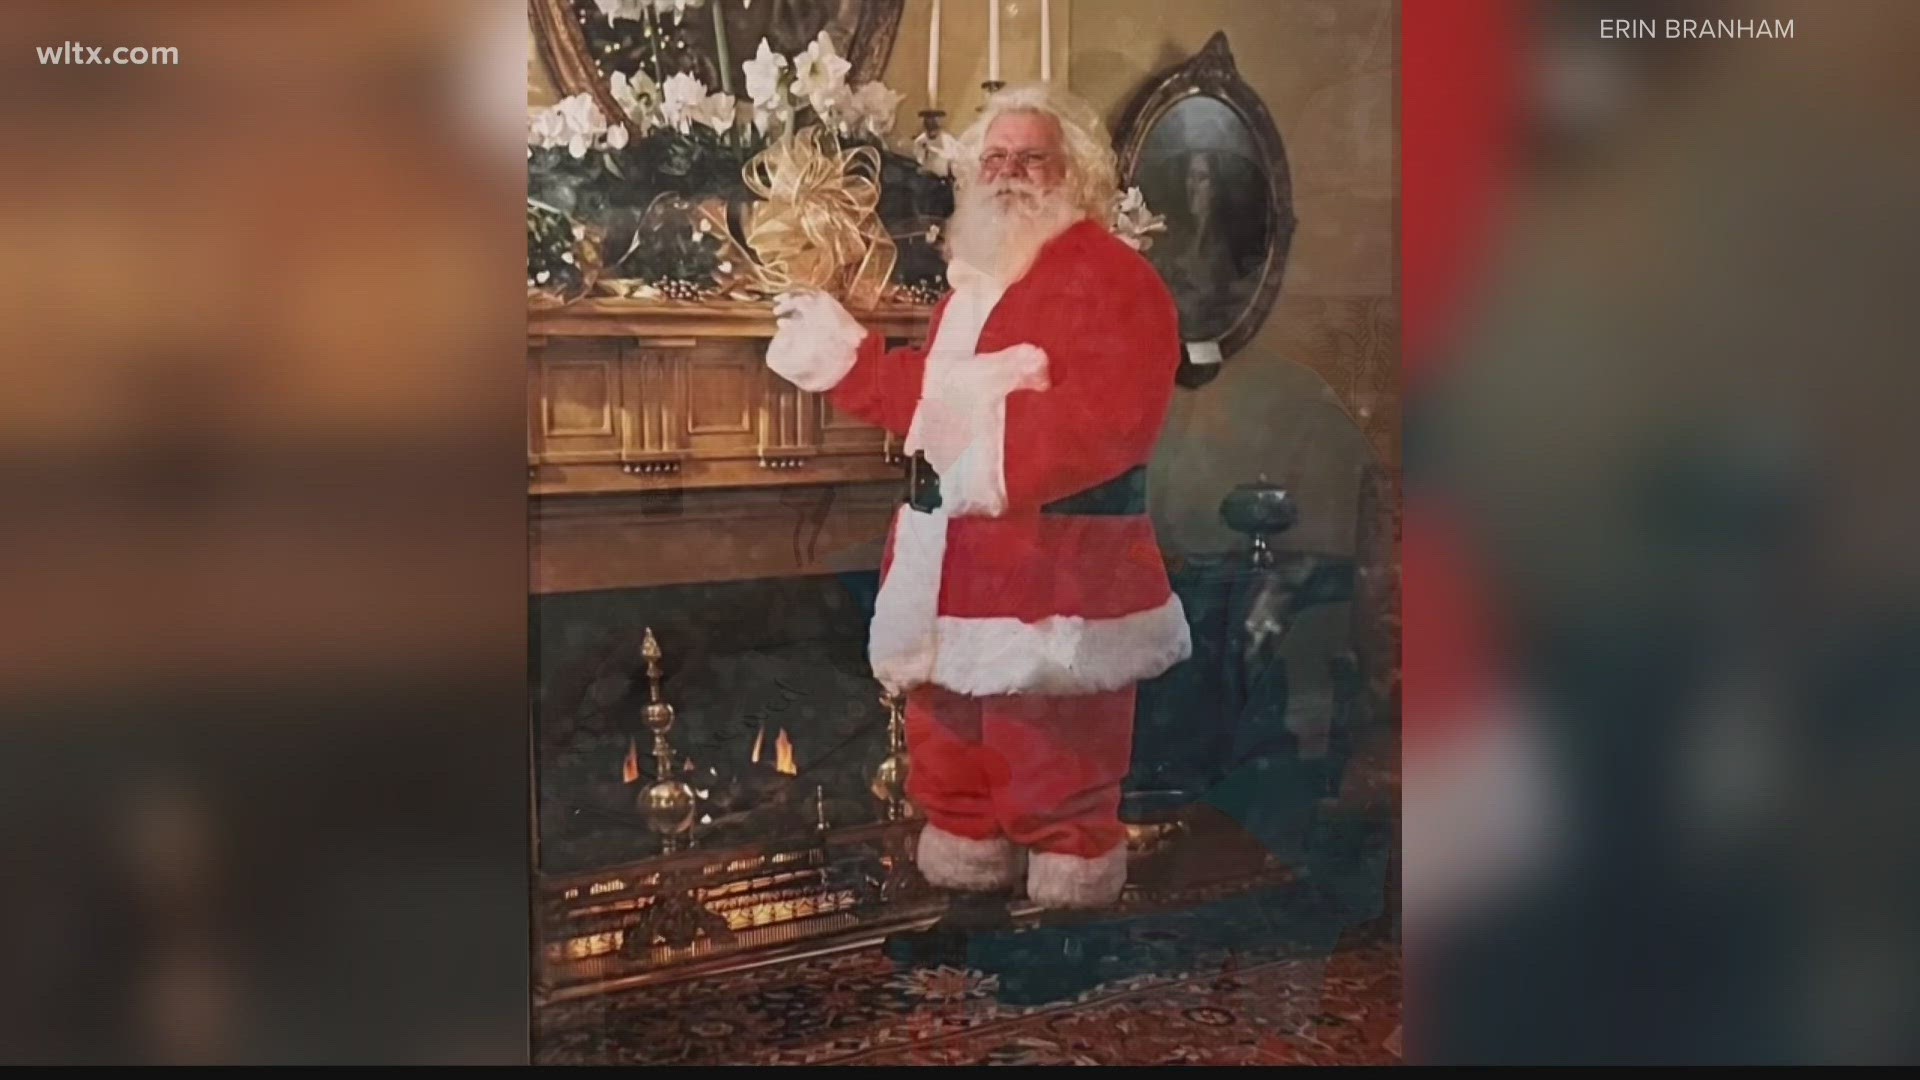 Many just knew him as Santa, Fred McCurdy listened to thousands of Christmas wishes, passed away after a long illness.